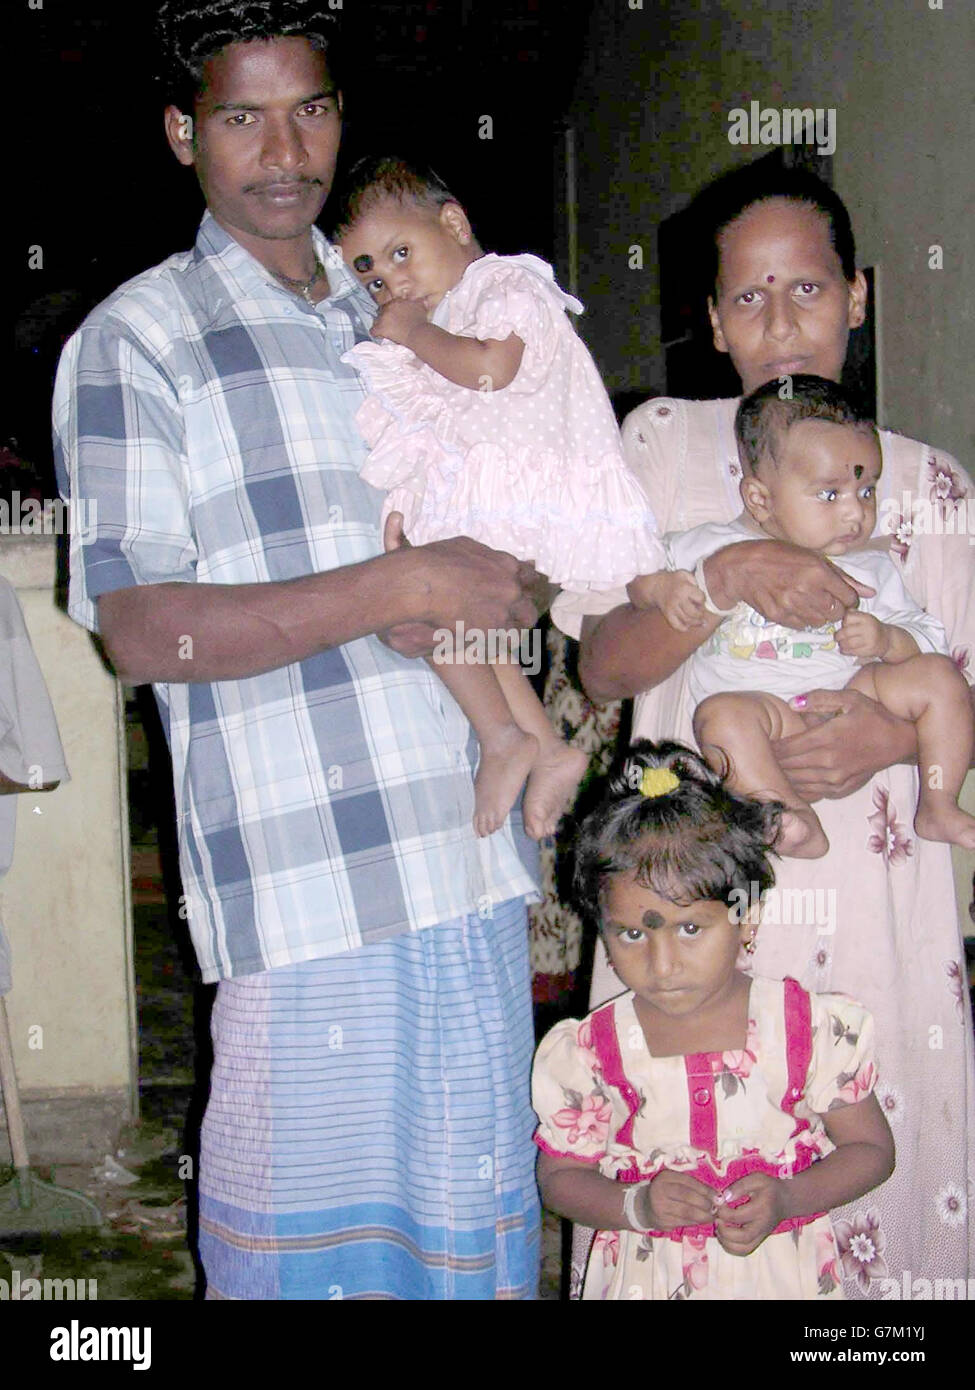 Premila Mirthanayagam, 23, and her husband Antonipillai, stand with their three children. Antonipillai carried two of the children and held onto a third as they fought through the waves. Stock Photo